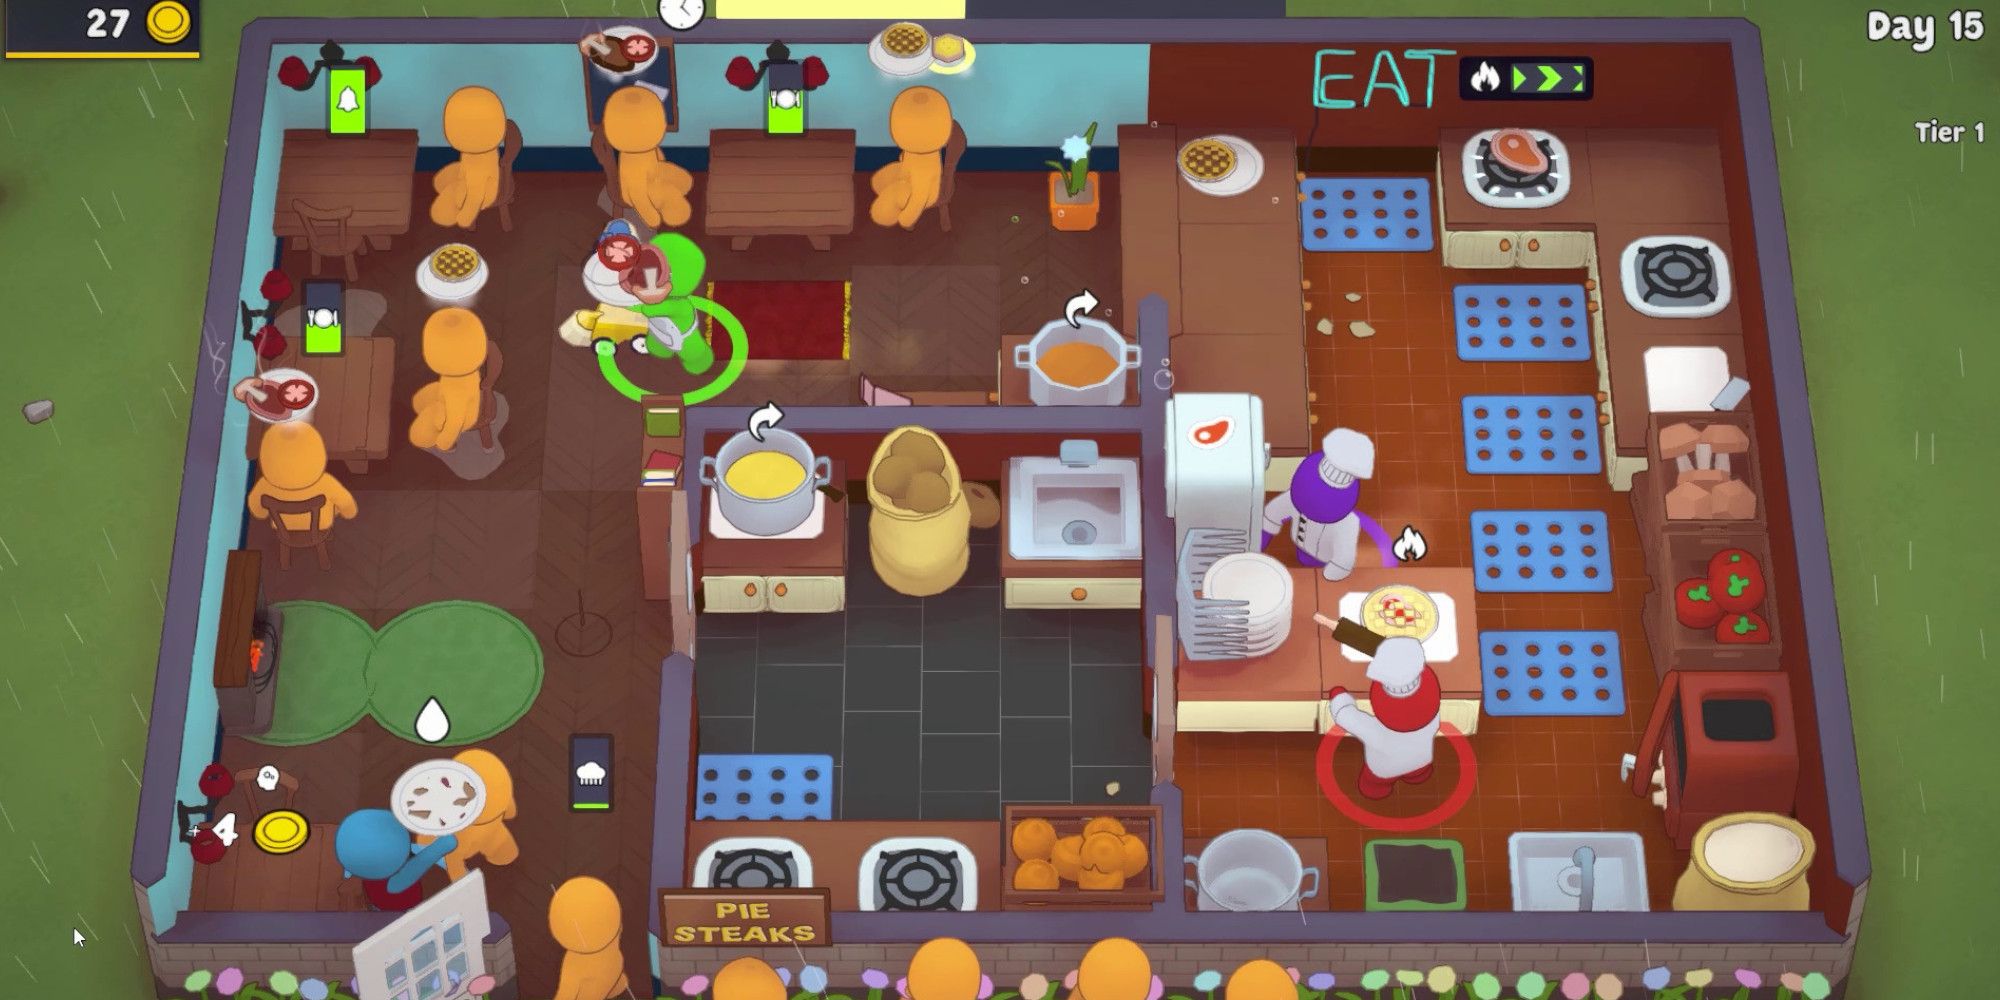 plateup - Busy Restaurant with four players